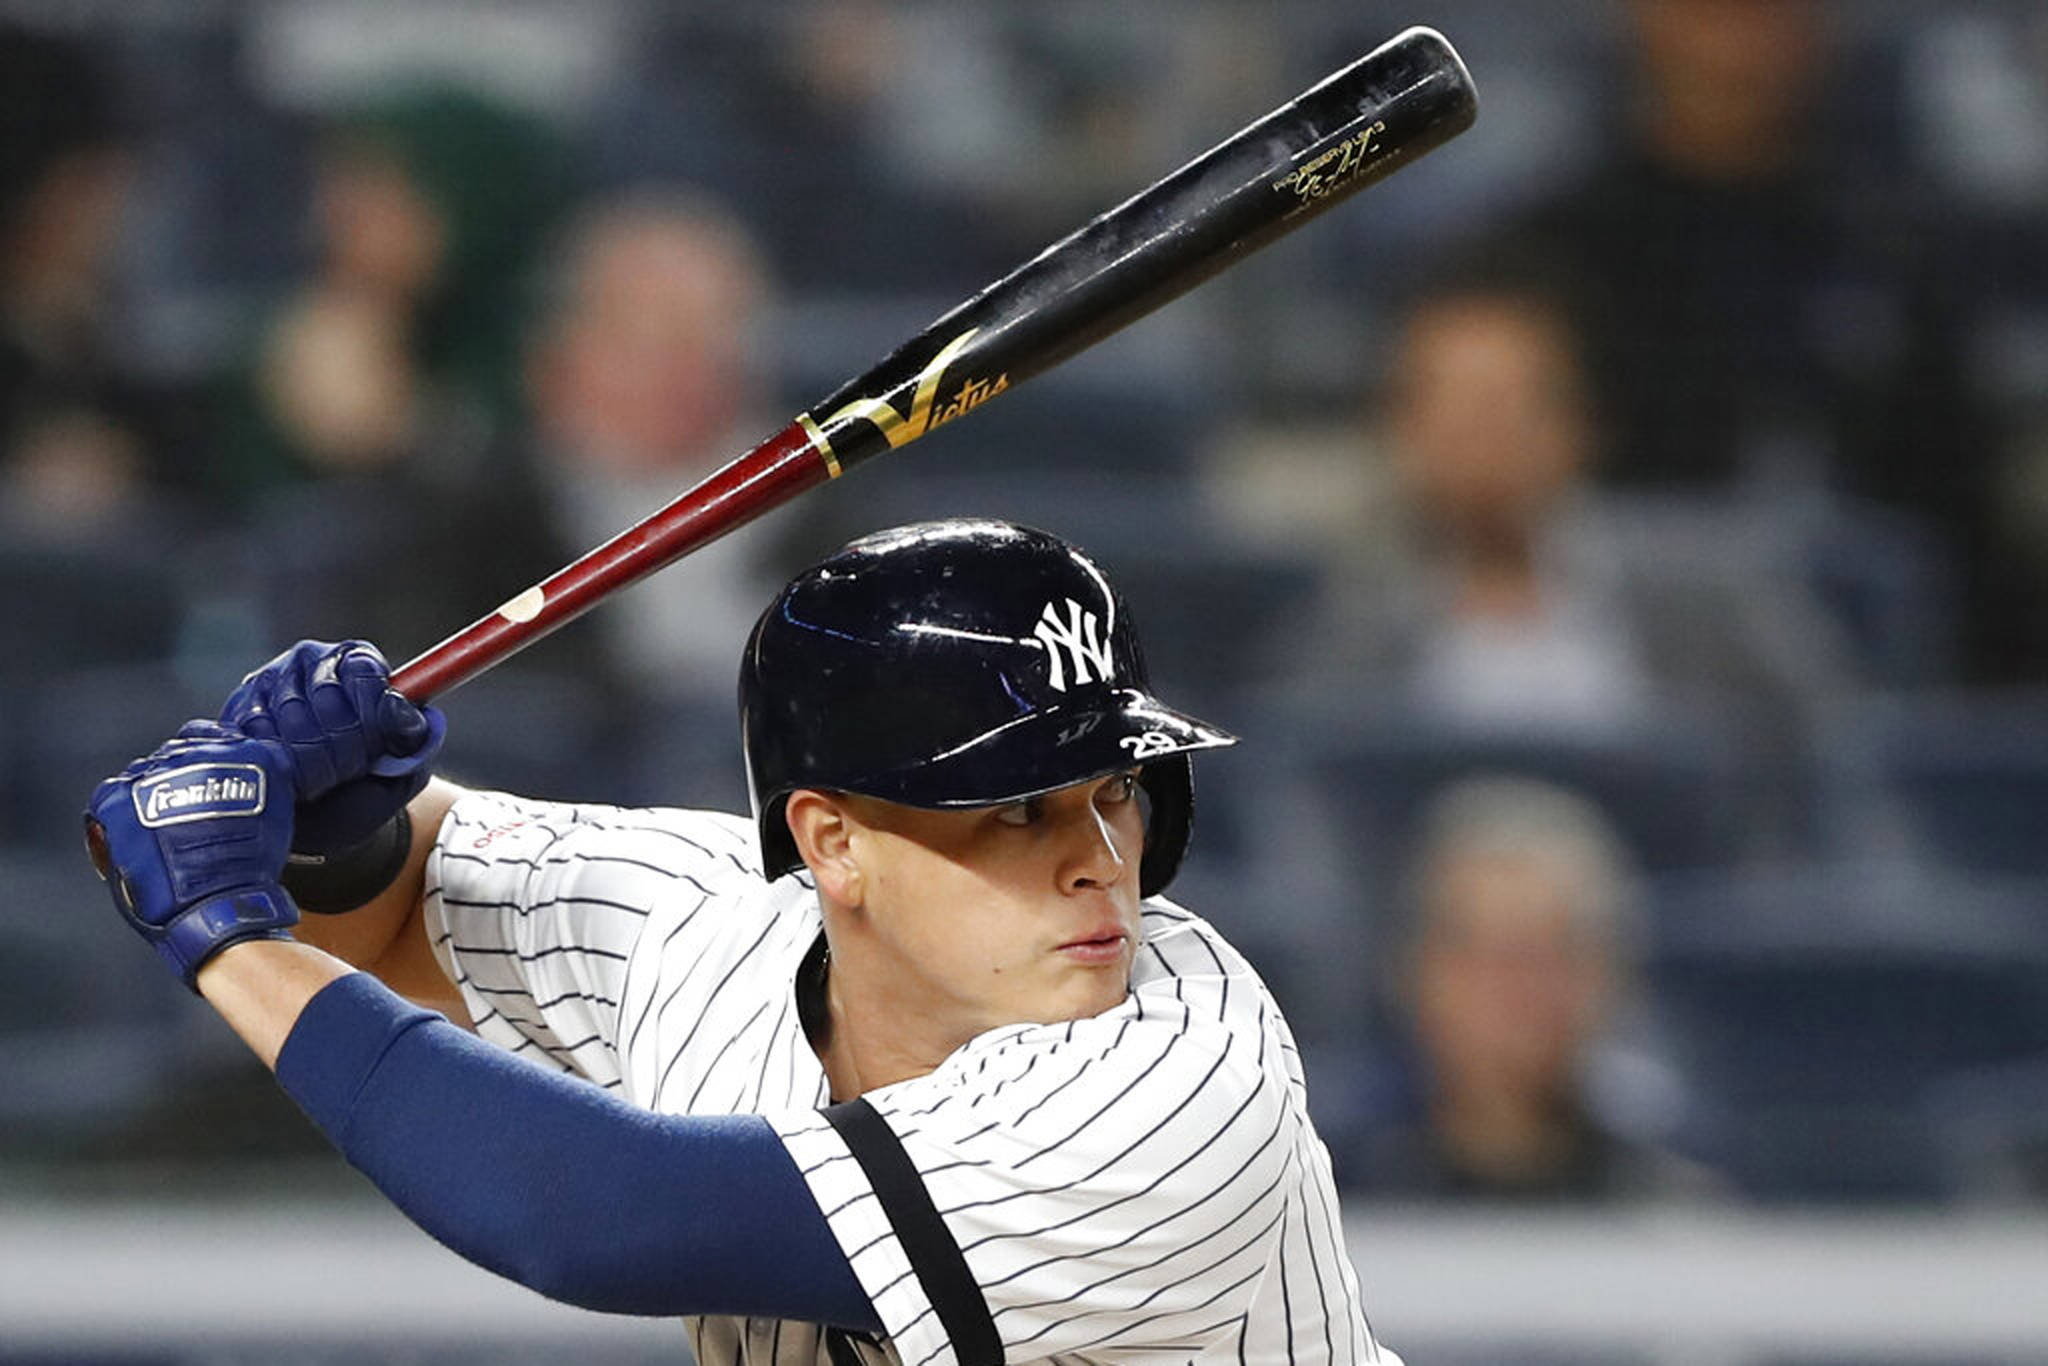 New York Yankees Gio Urshela bats in a game against the Seattle Mariners on Thursday, May 9, 2019 in New York. (Kathy Willens | Associated Press File)